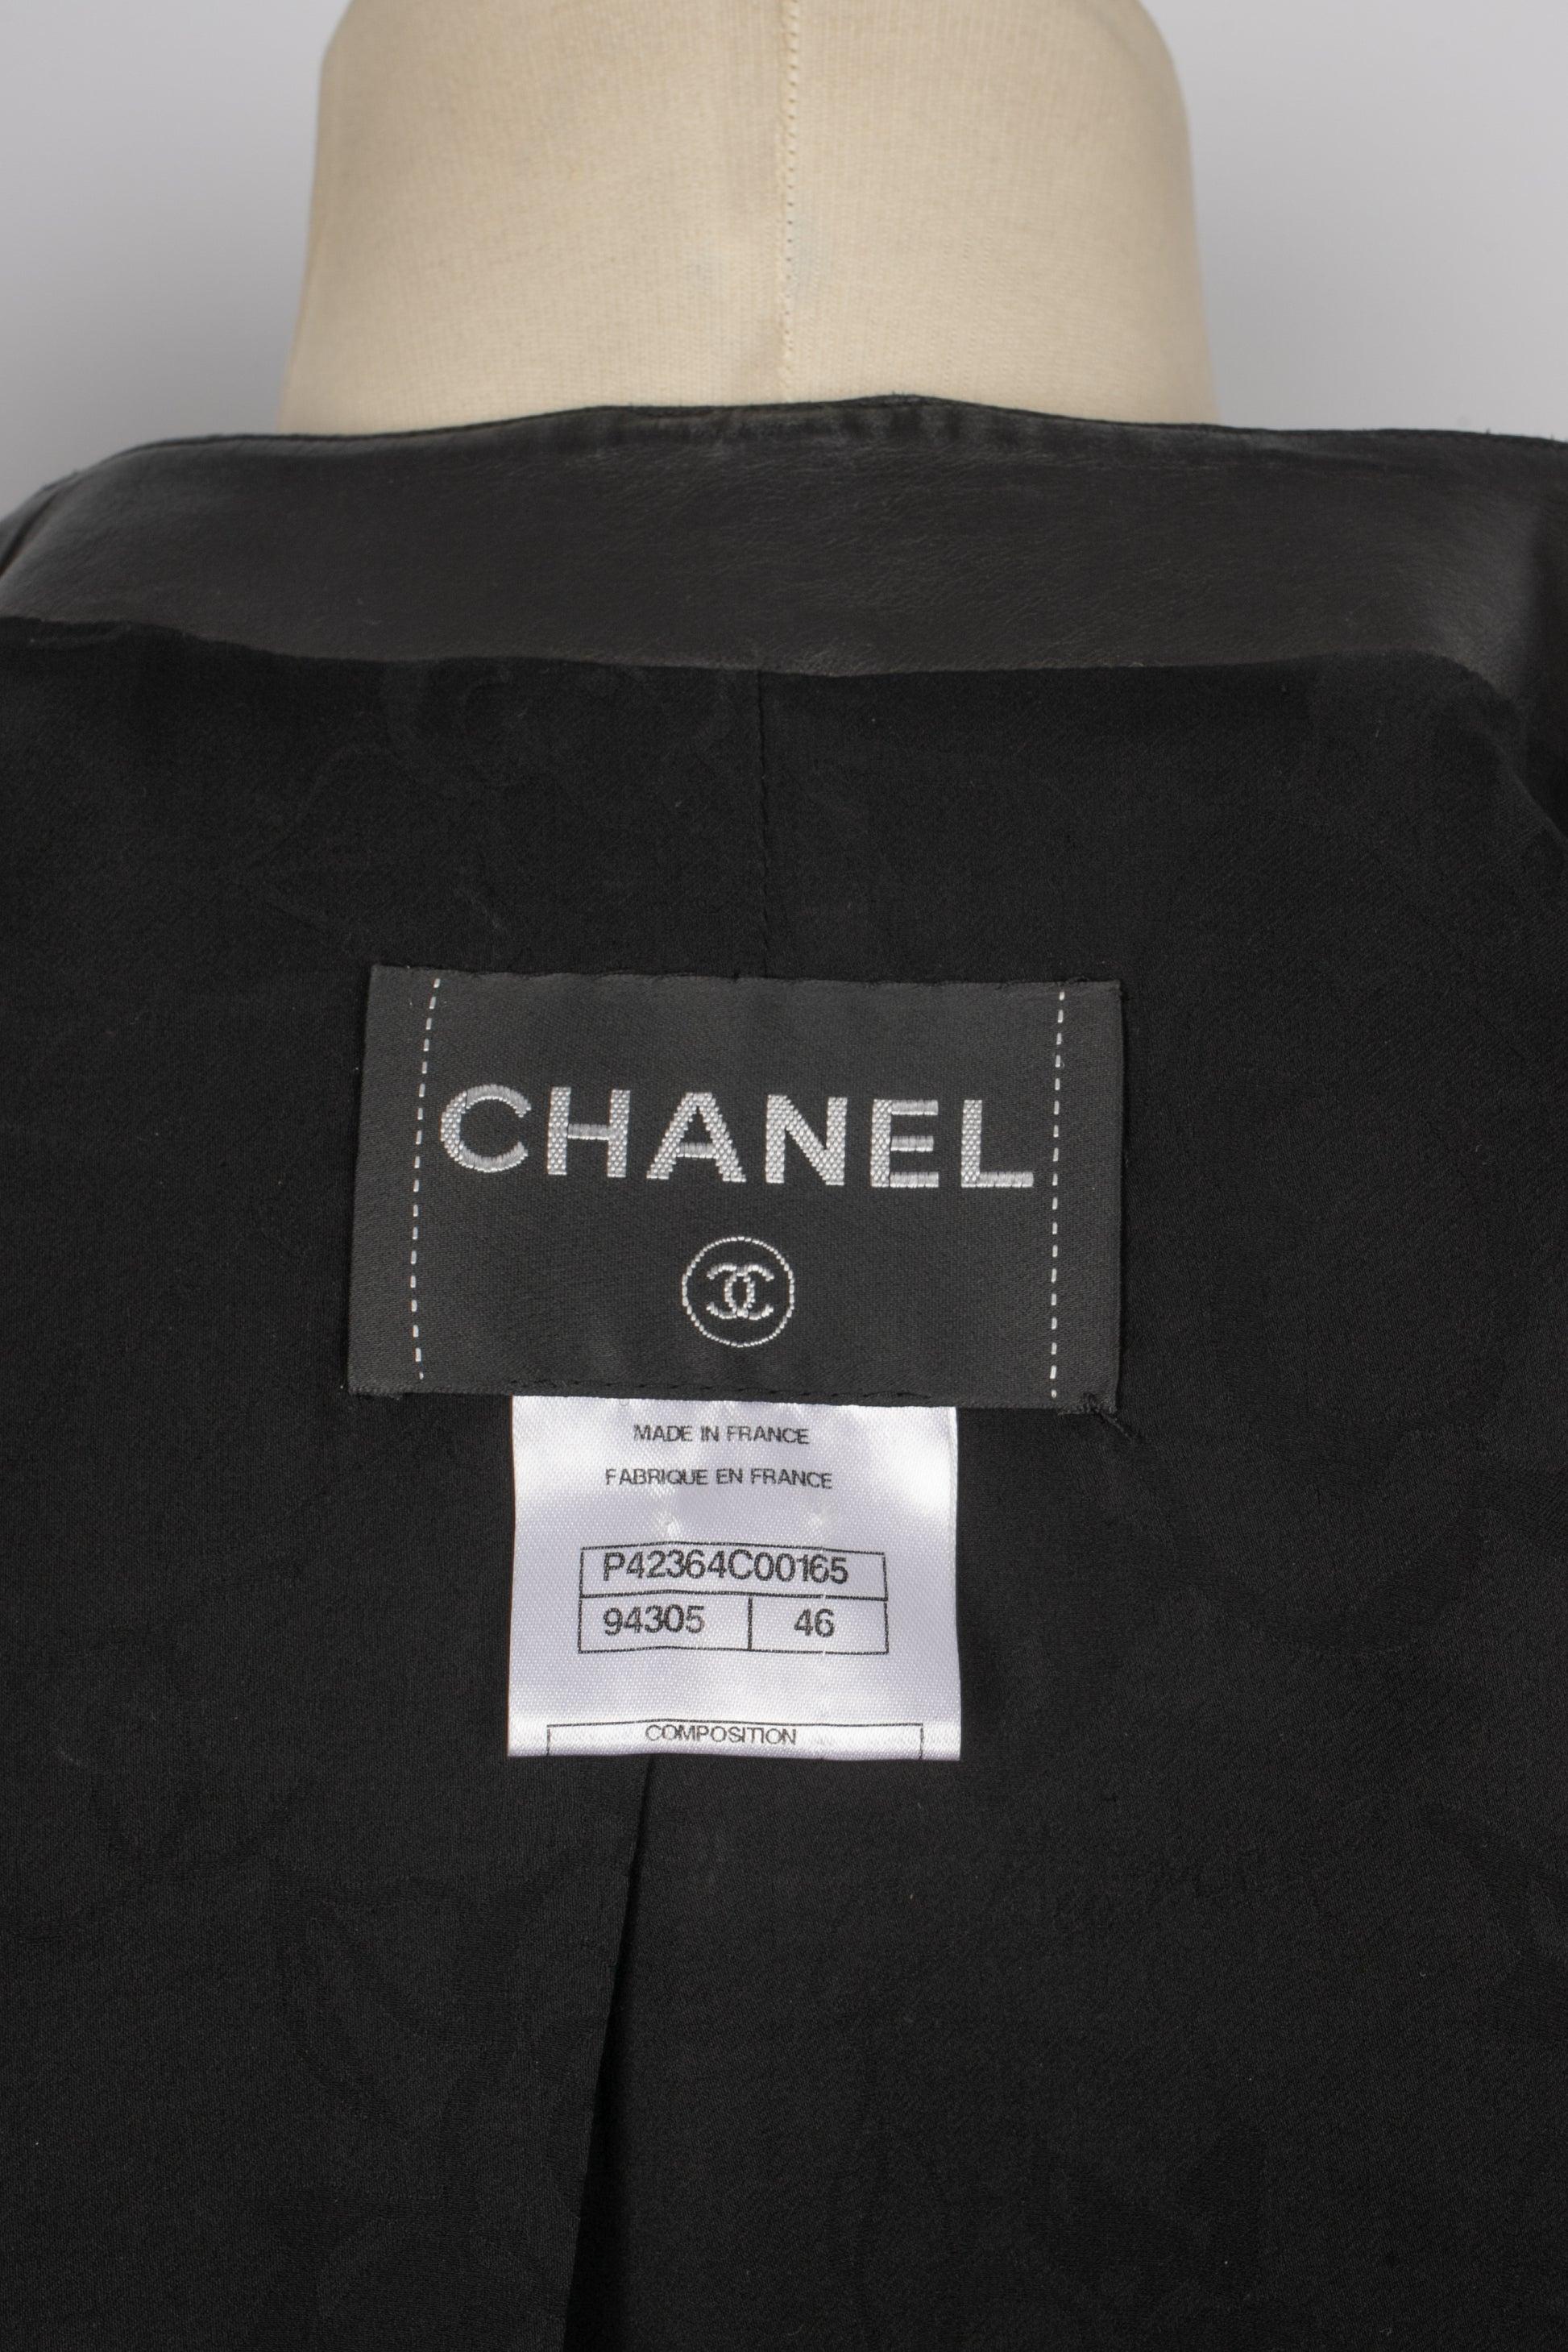 Chanel Leather Jacket in Black Calfskin and Silk Lining For Sale 5